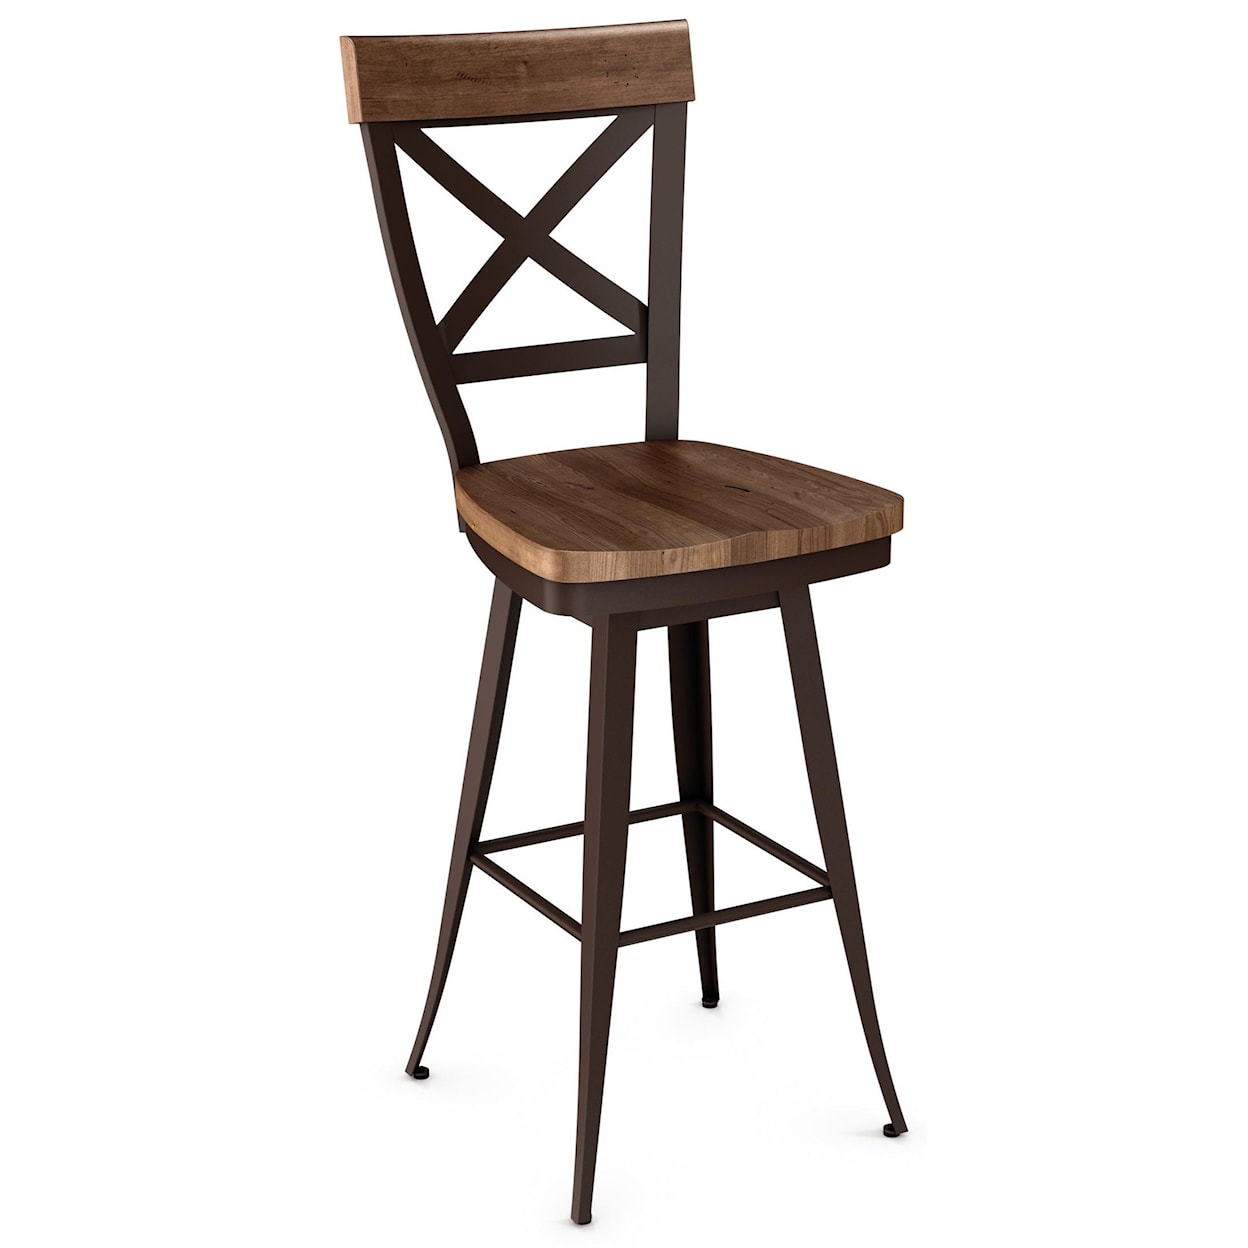 Amisco Industrial 30" Kyle Swivel Stool with Wood Seat